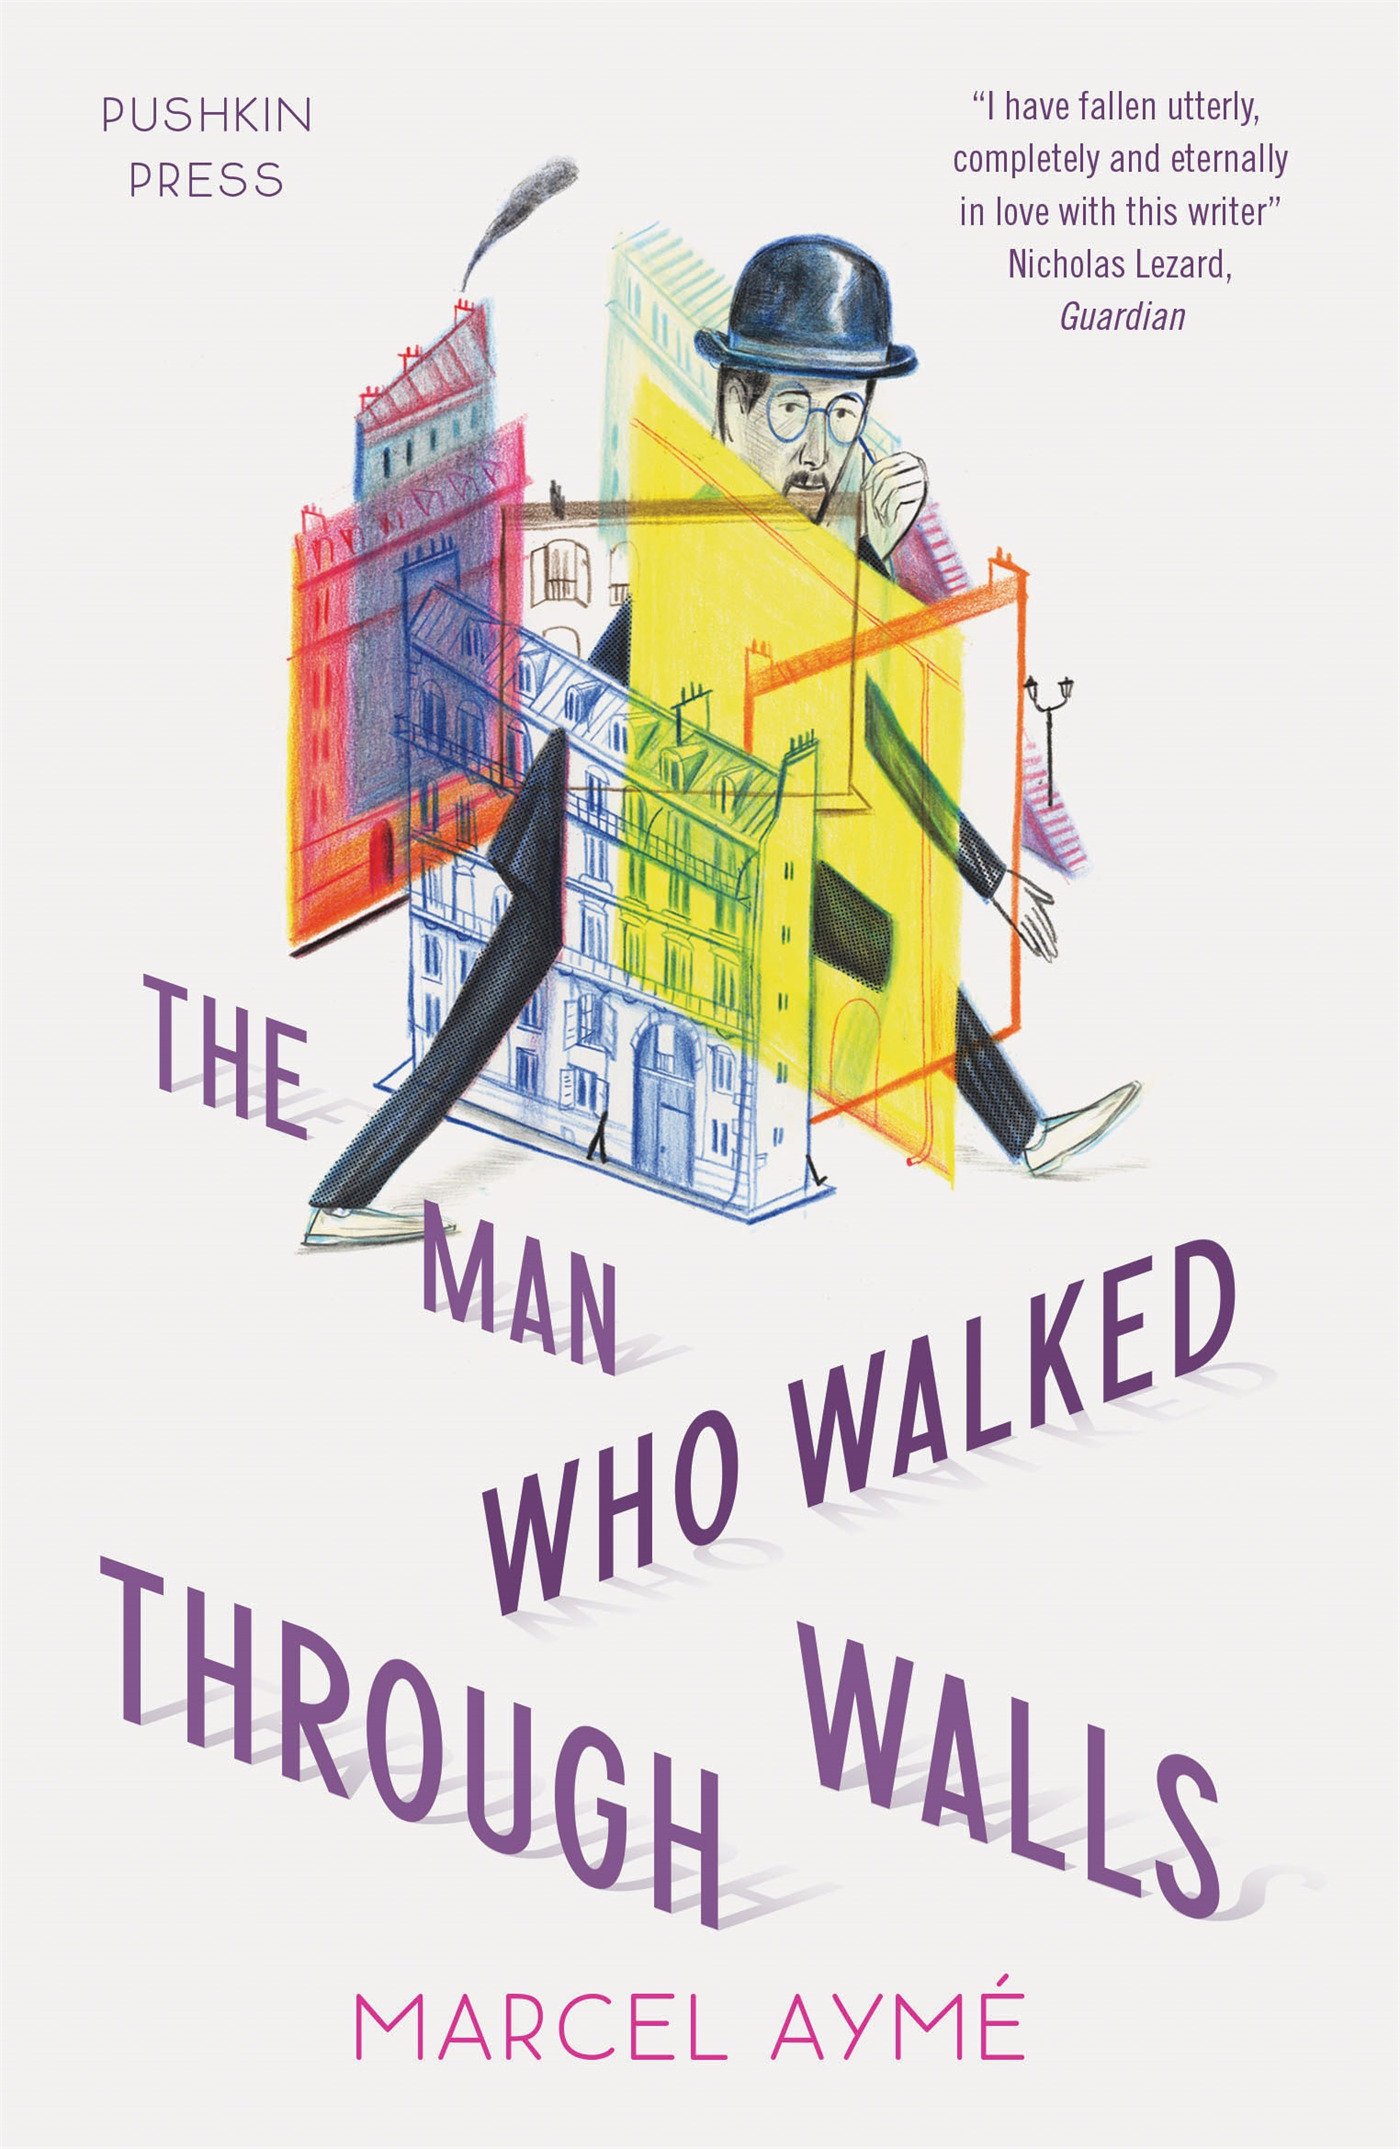 The man who walked through walls | Marcel (Author) Ayme